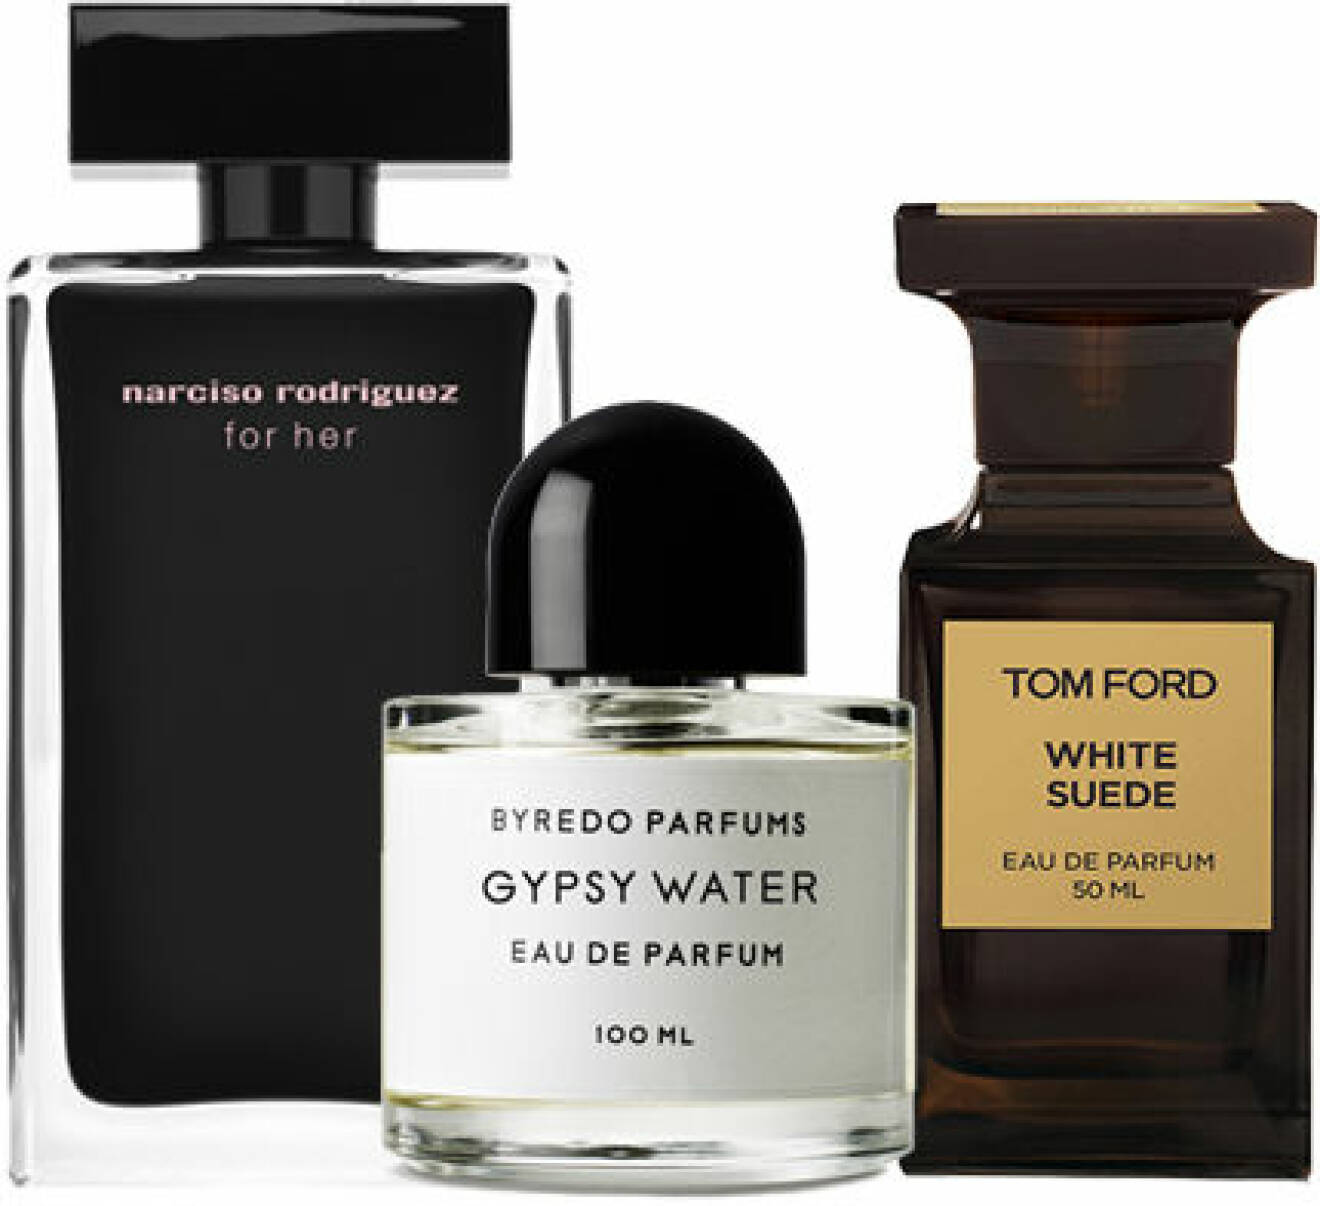 Musc for her, Narciso Rodriguez. Gypsy water, Byredo perfums. White Suede, Tom Ford